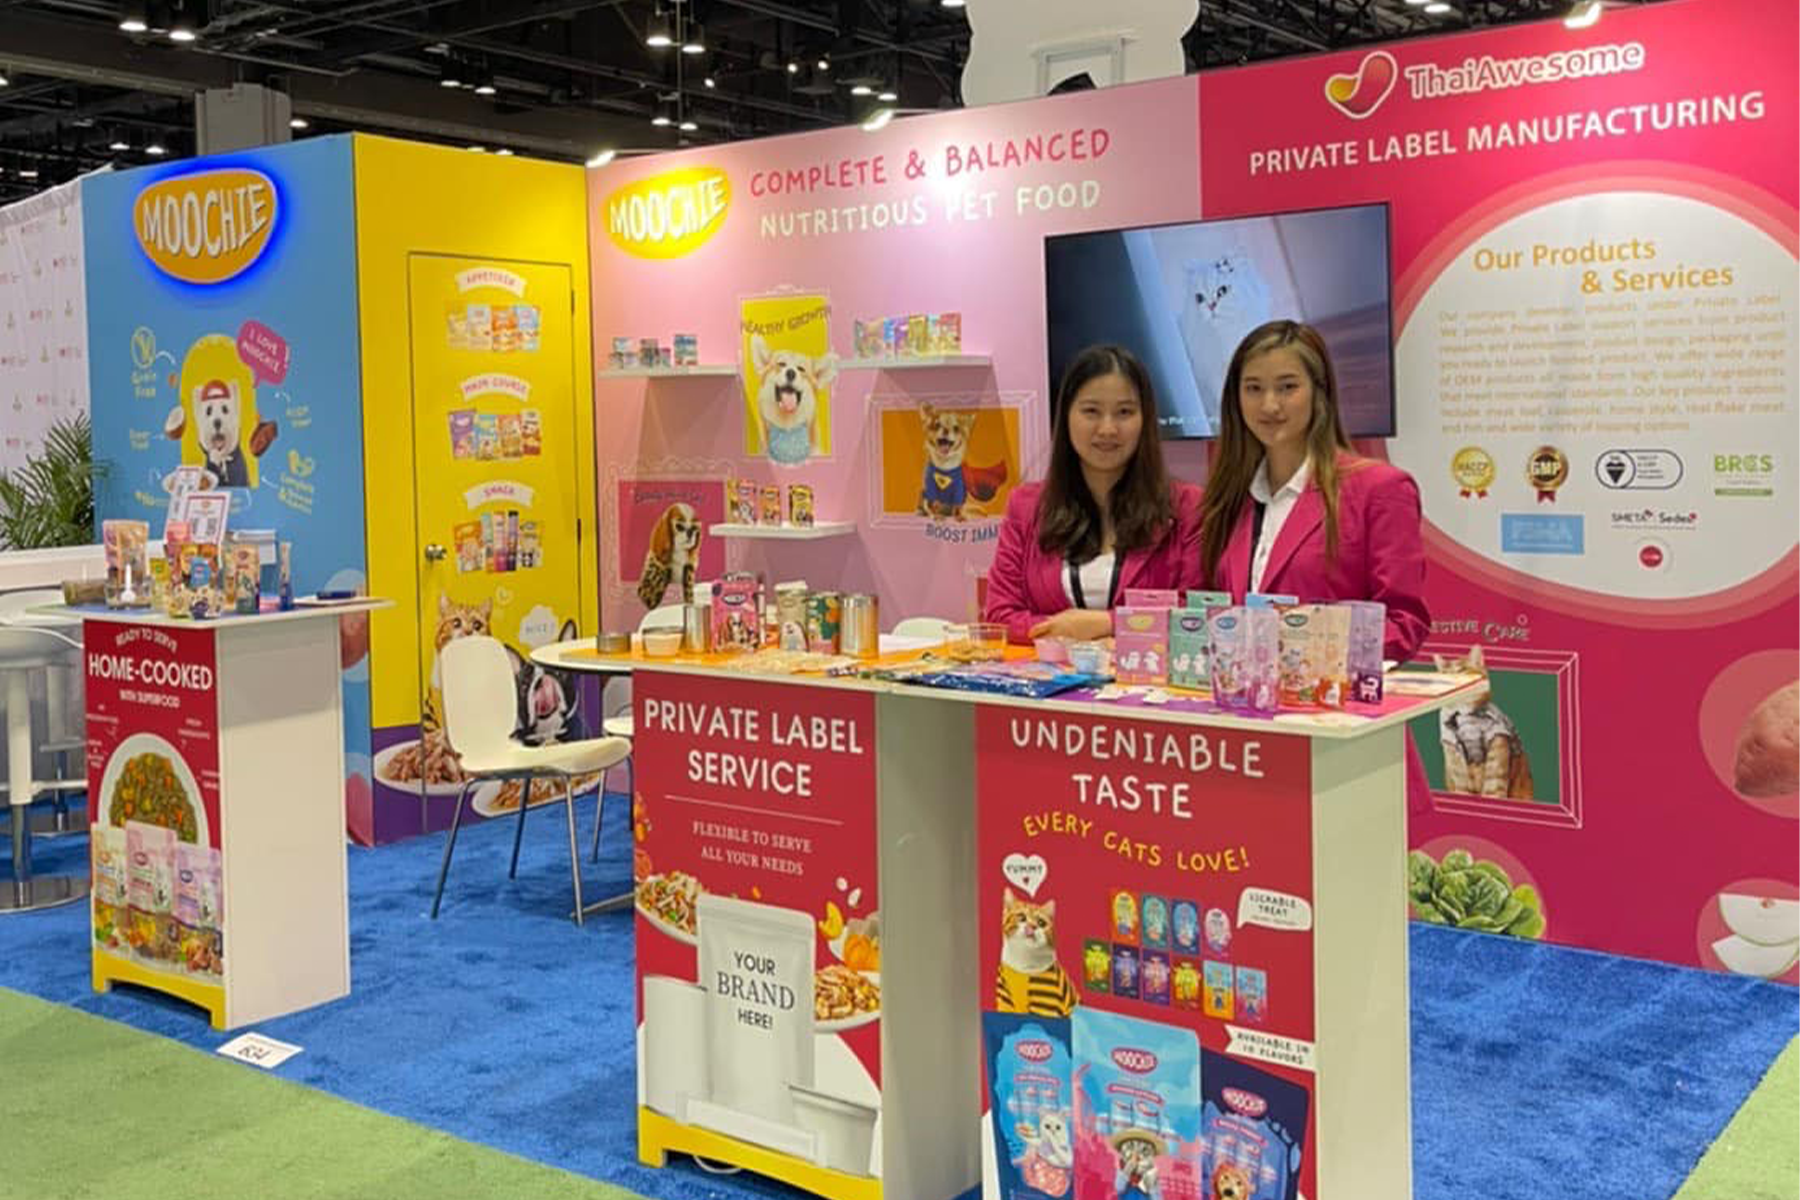 Superzoo Exhibition on 17-19 August 2021 in Mandalay Bay, Las Vegas